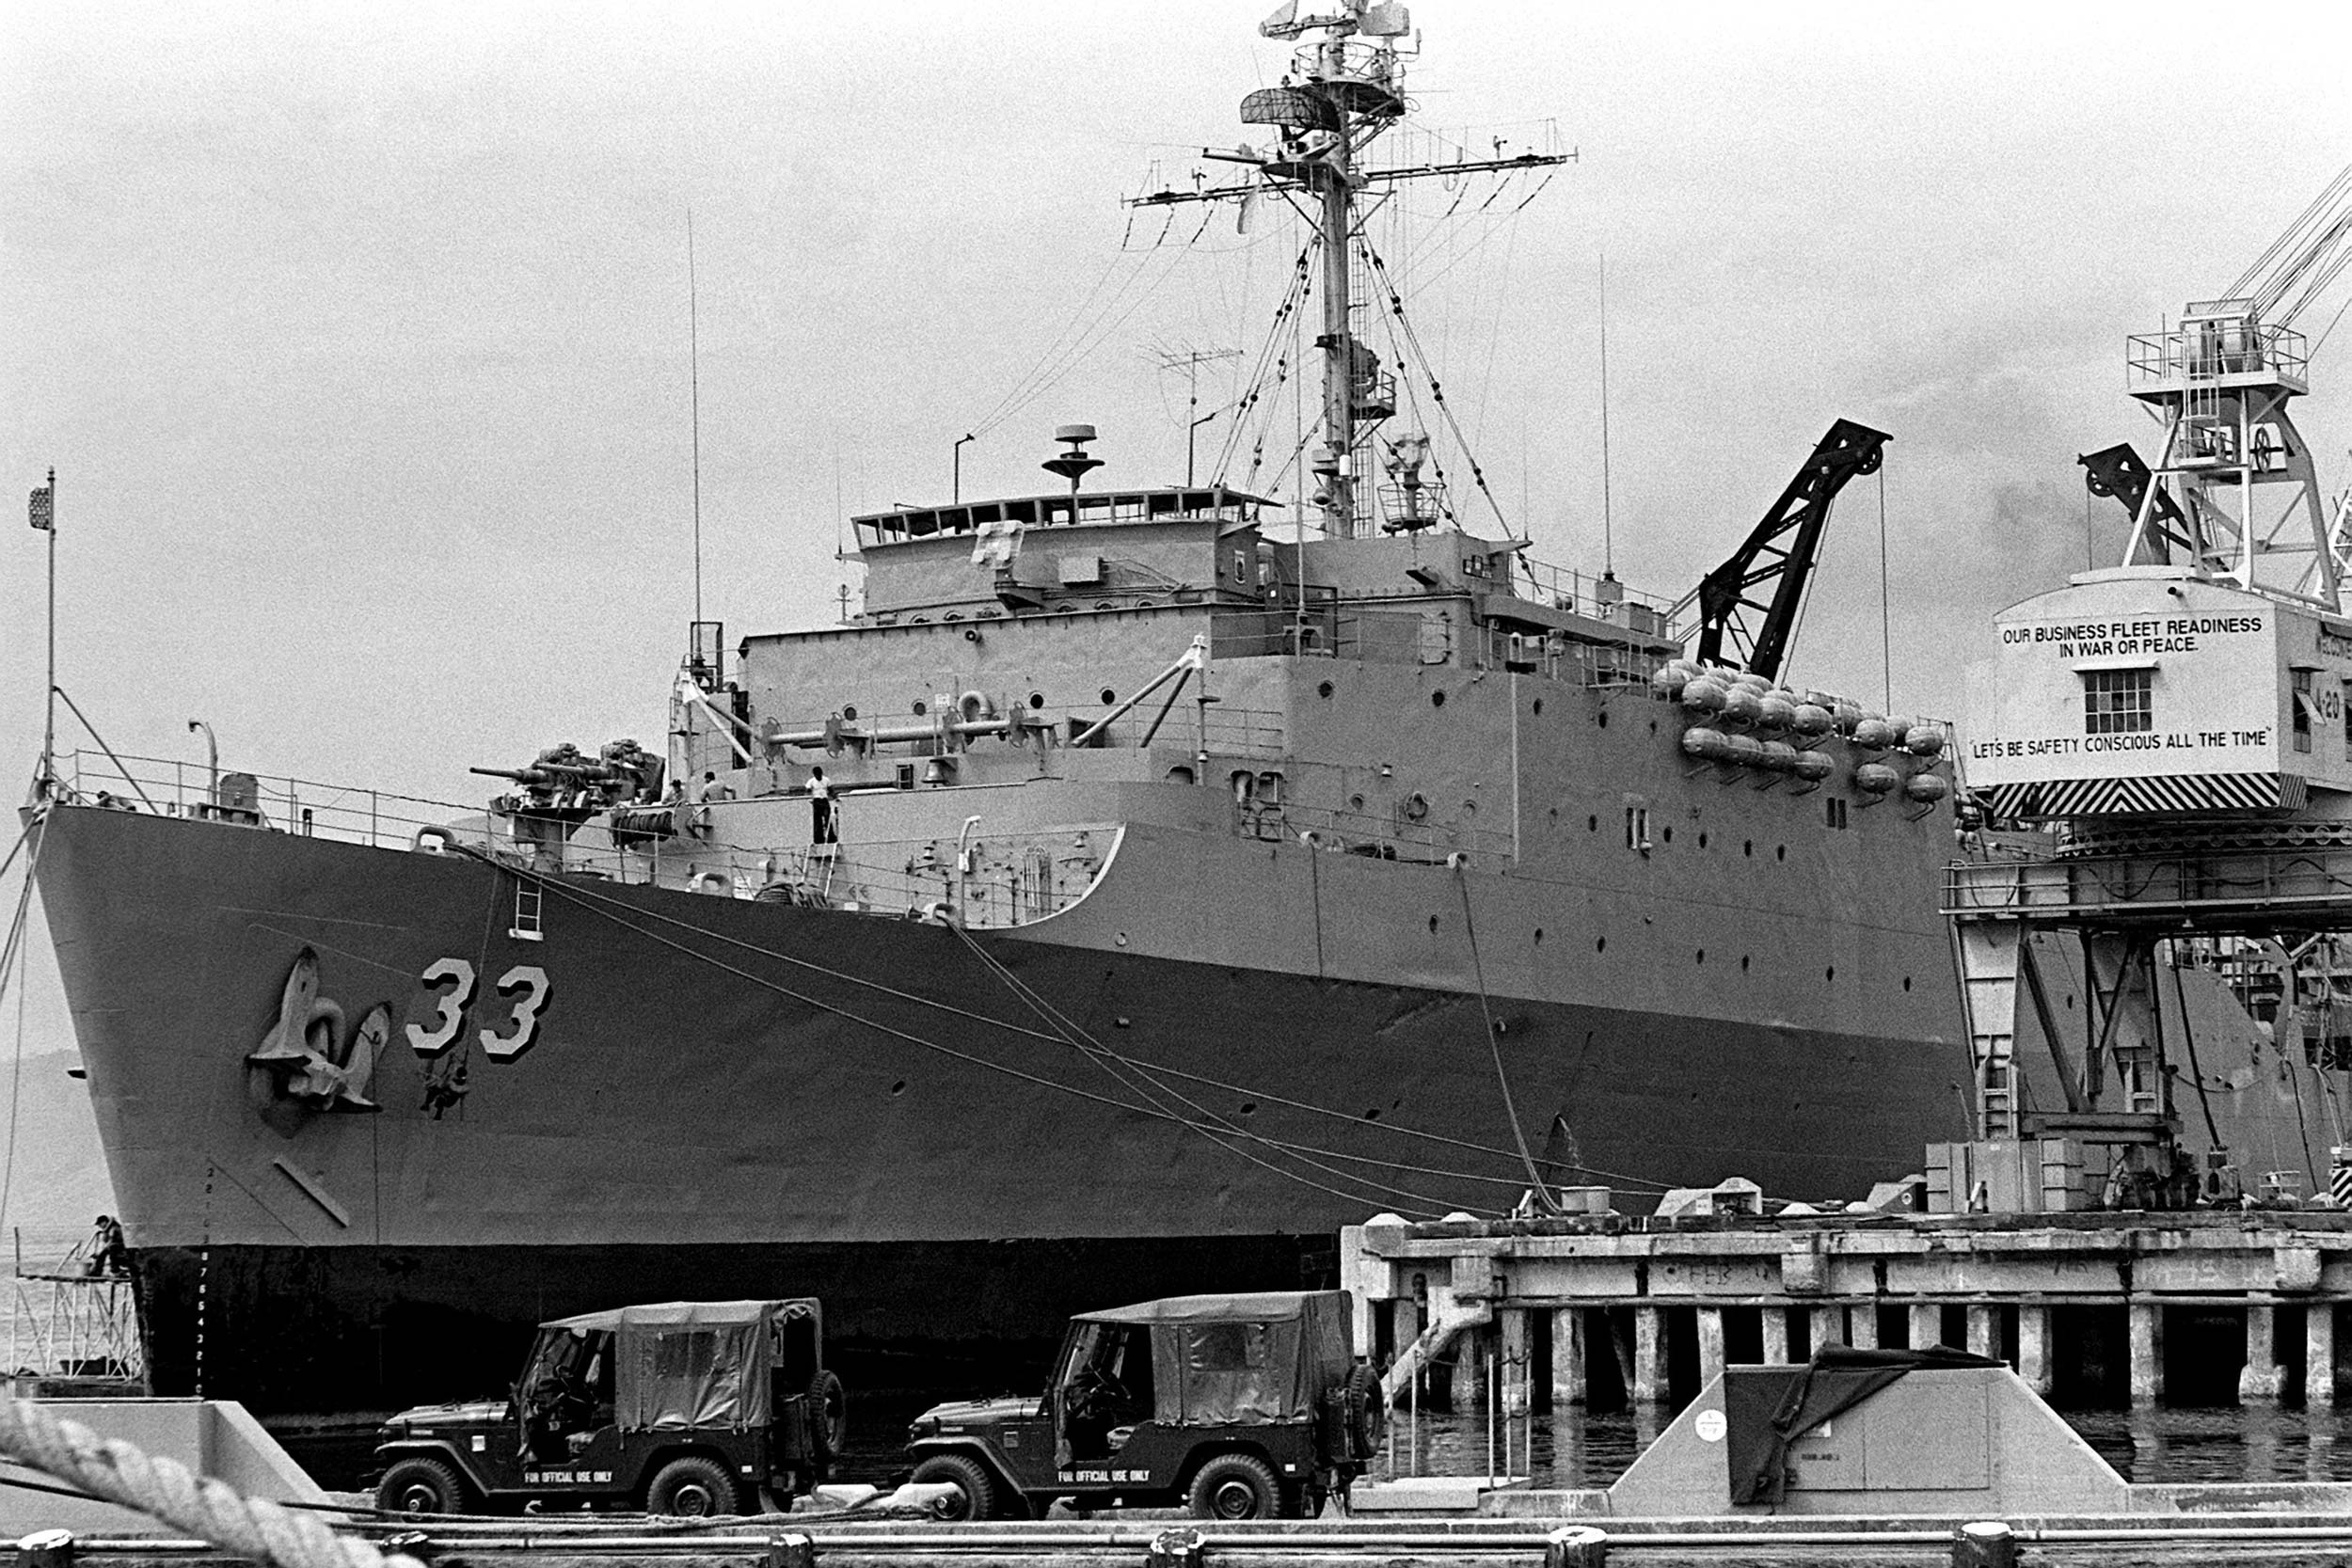 Sailors on ships like the USS Alamo could have been exposed to Agent Orange during the Vietnam War but have had trouble verifying their benefit claims. 